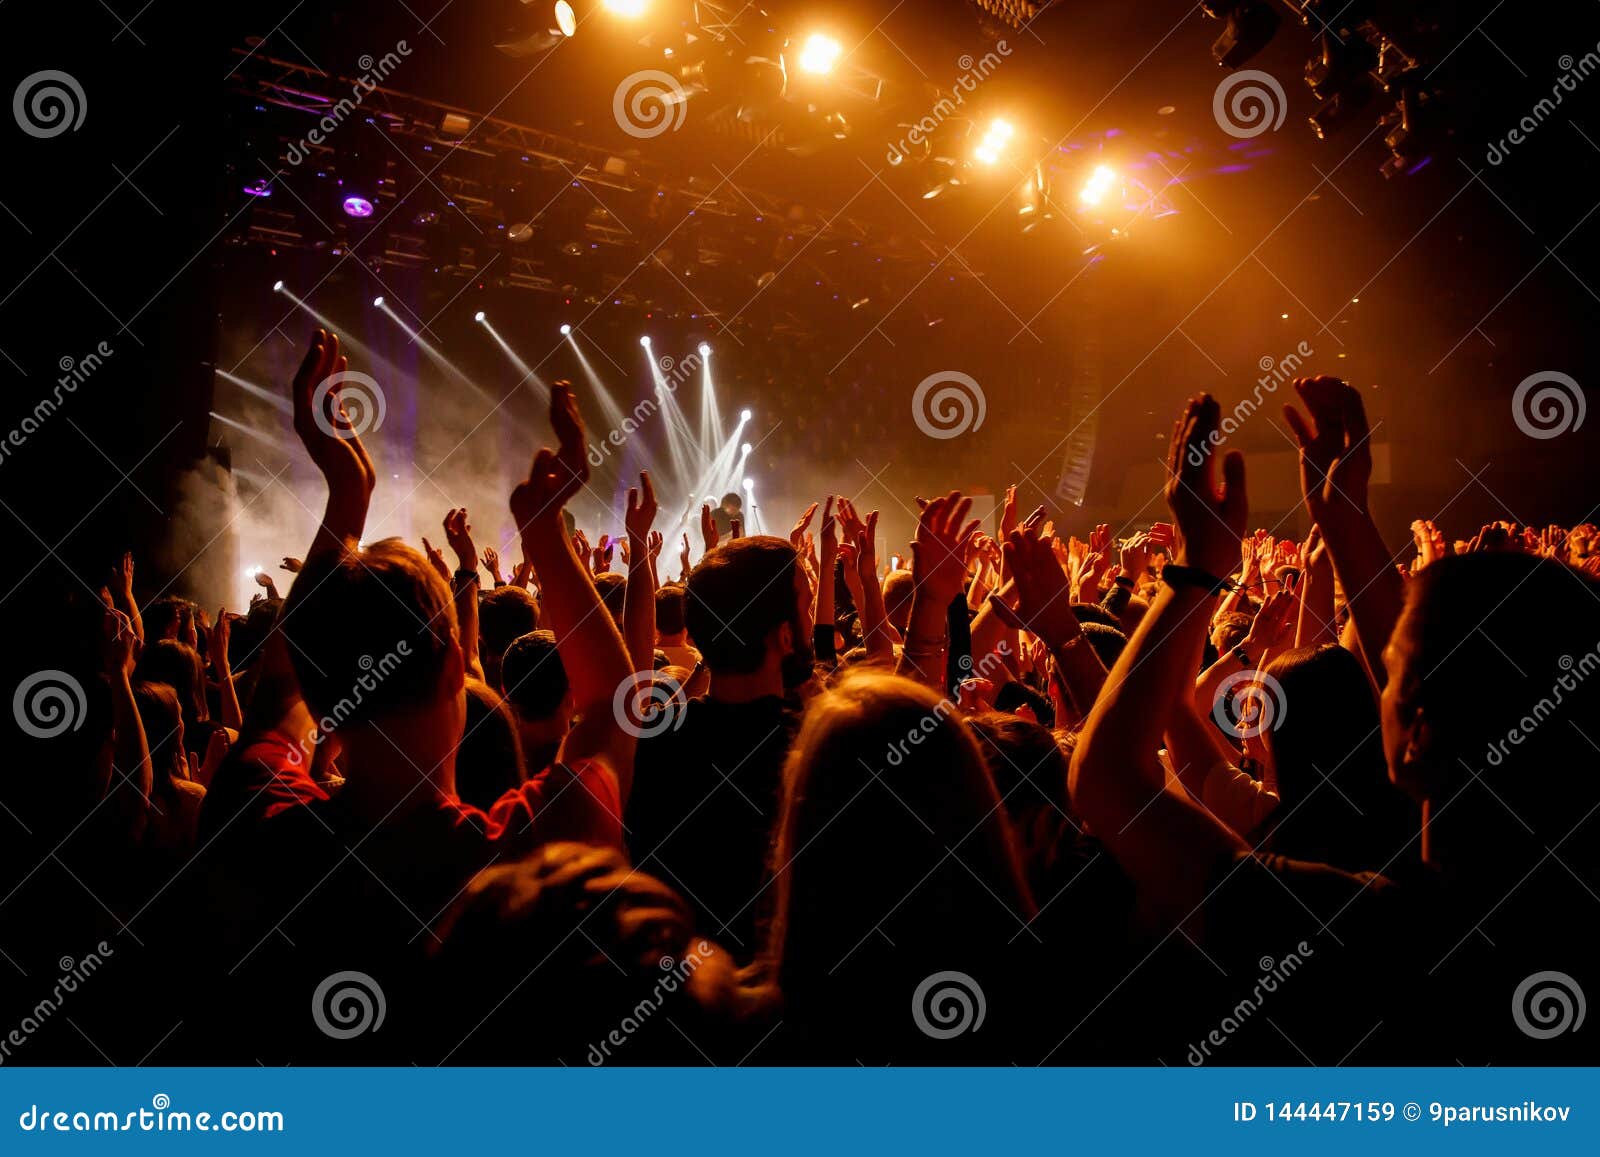 Crowd on Music Show, Happy People with Raised Hands. Orange Stage Light ...